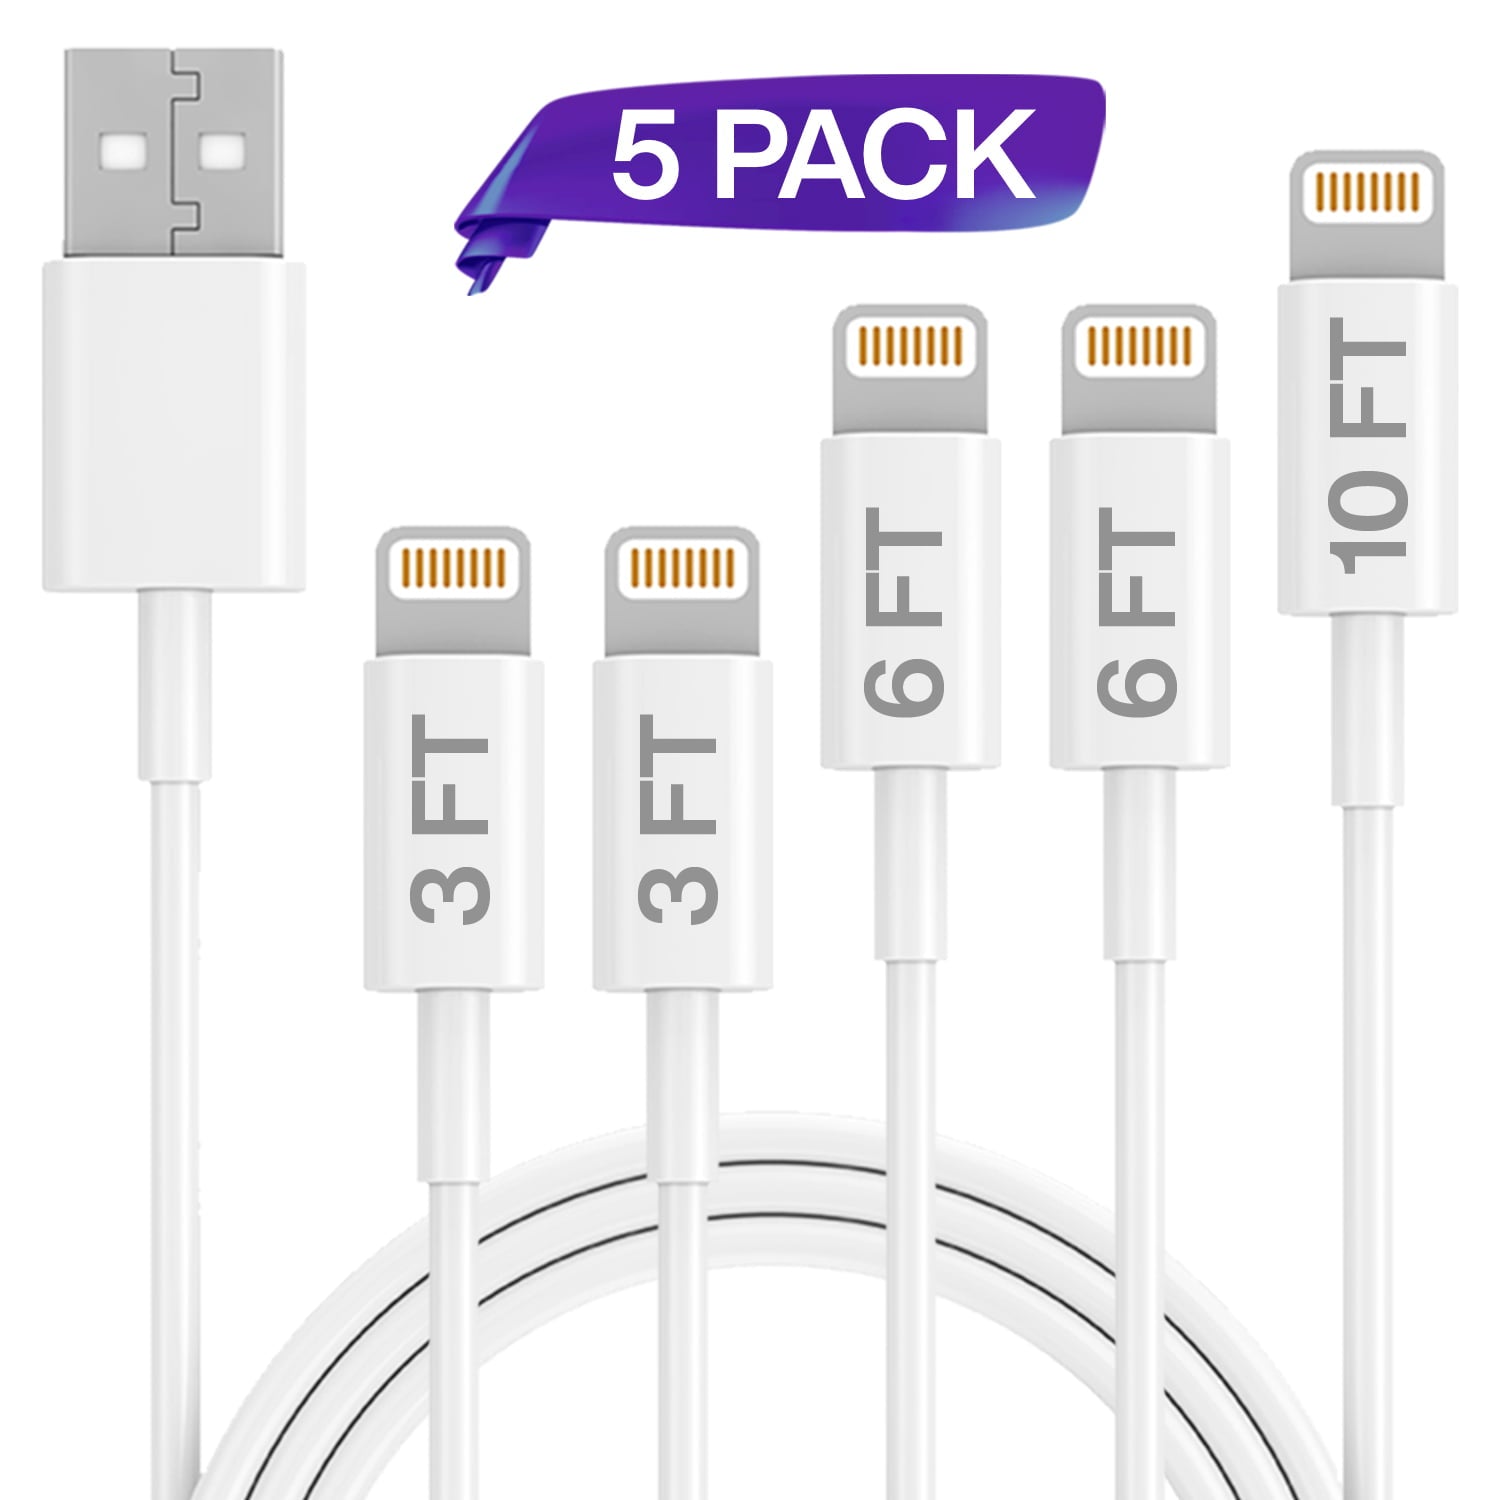 iPhone Charging Cable, Ixir, MFI Certified5 Pack (3FT, 6FT, 10FT) USB Cable, For Apple iPhone Xs,Xs Max,XR,X,8,8Plus,7,7Plus,6S,6SPlus,iPad Air,Mini/iPod Touch/Case, Charging Cord